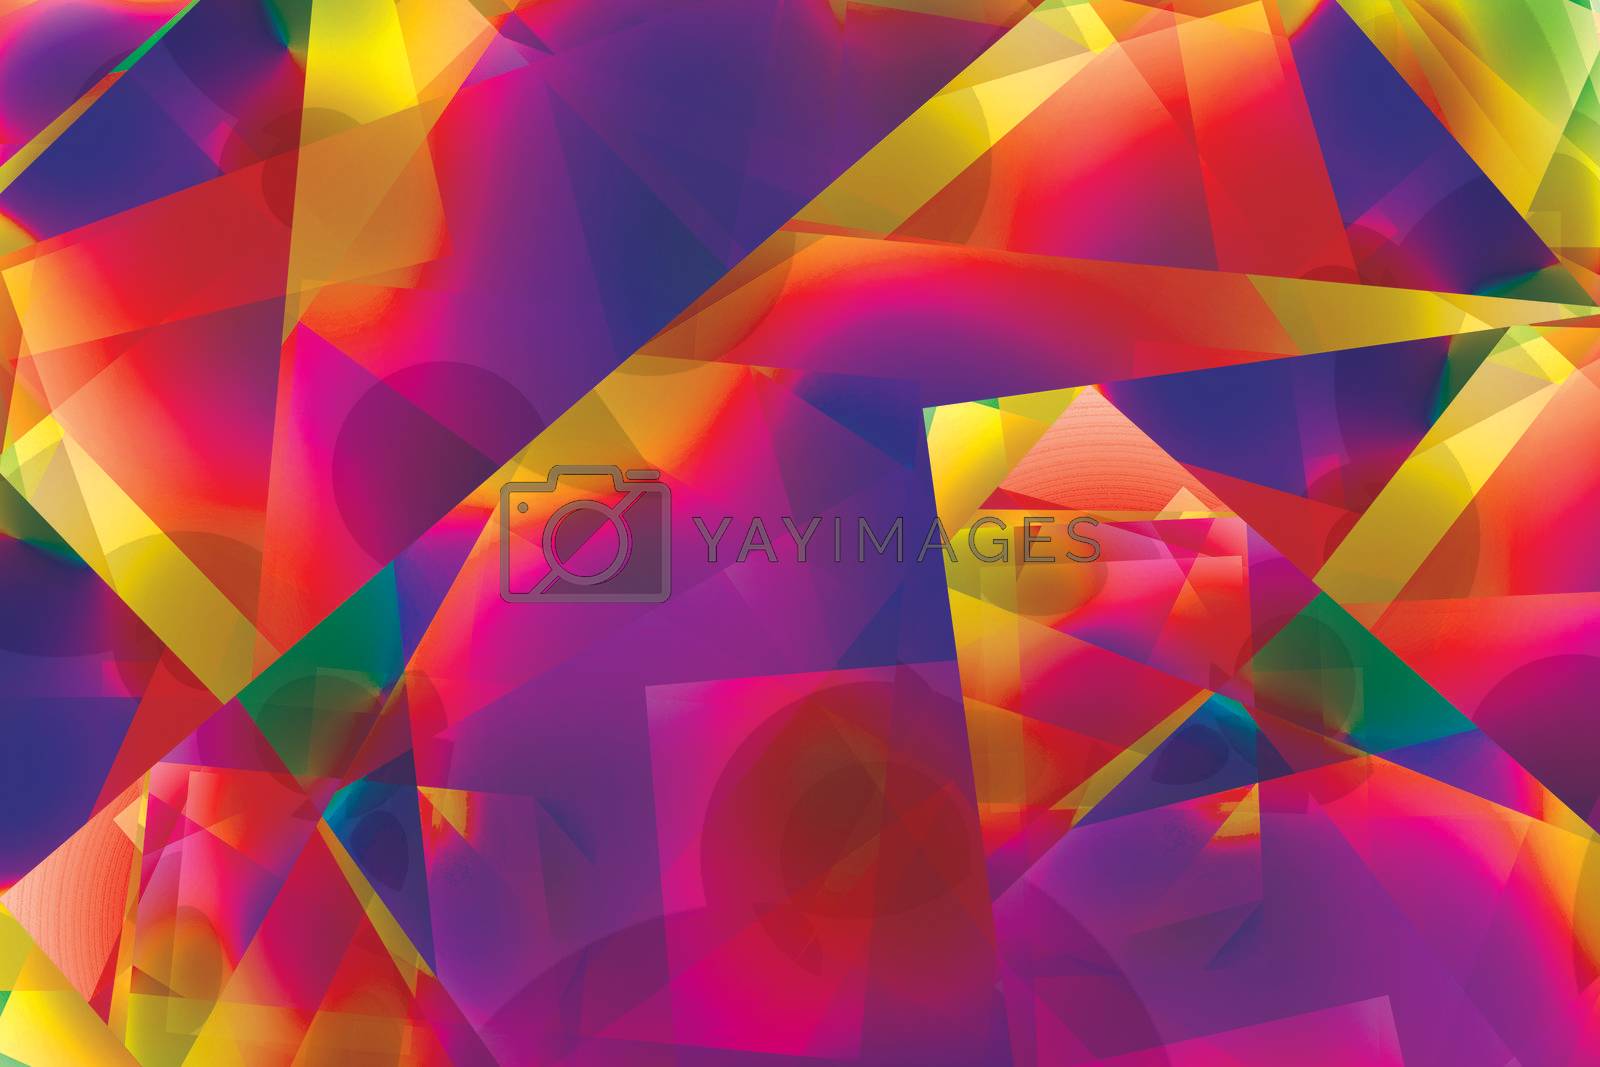 Royalty free image of Saturated rainbow abstract  by rustycanuck